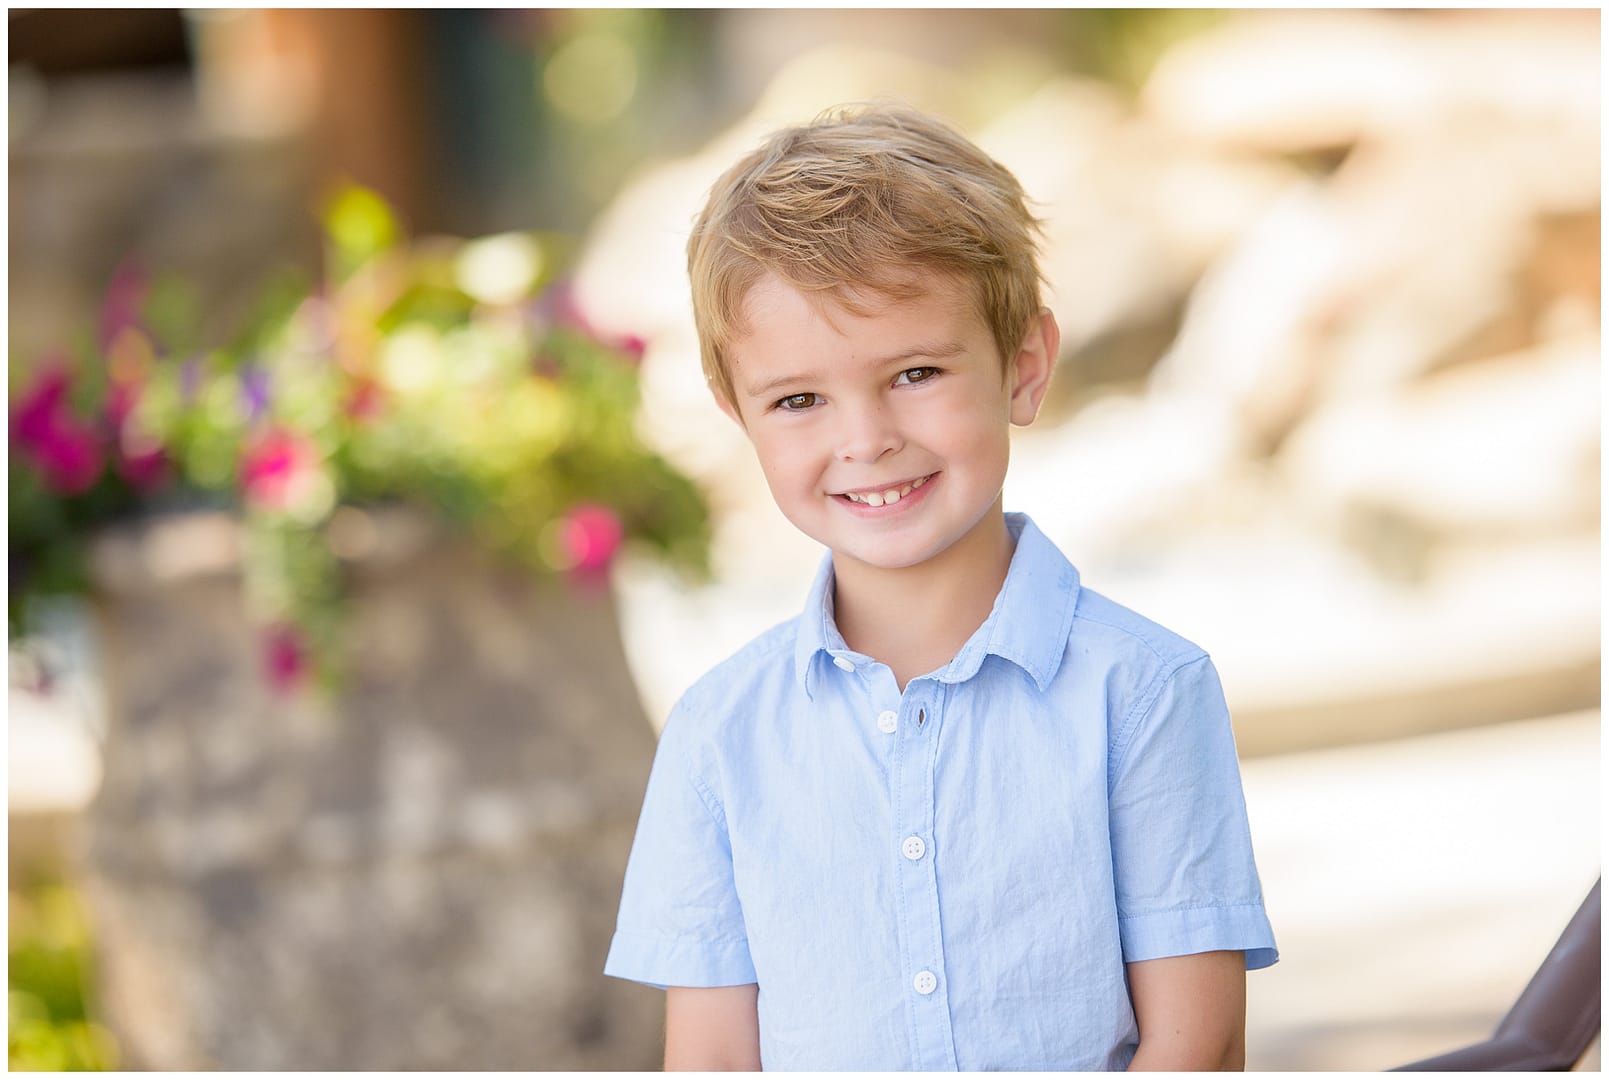 Young boy poses for portrait. Photo by Tiffany Hix Photography.